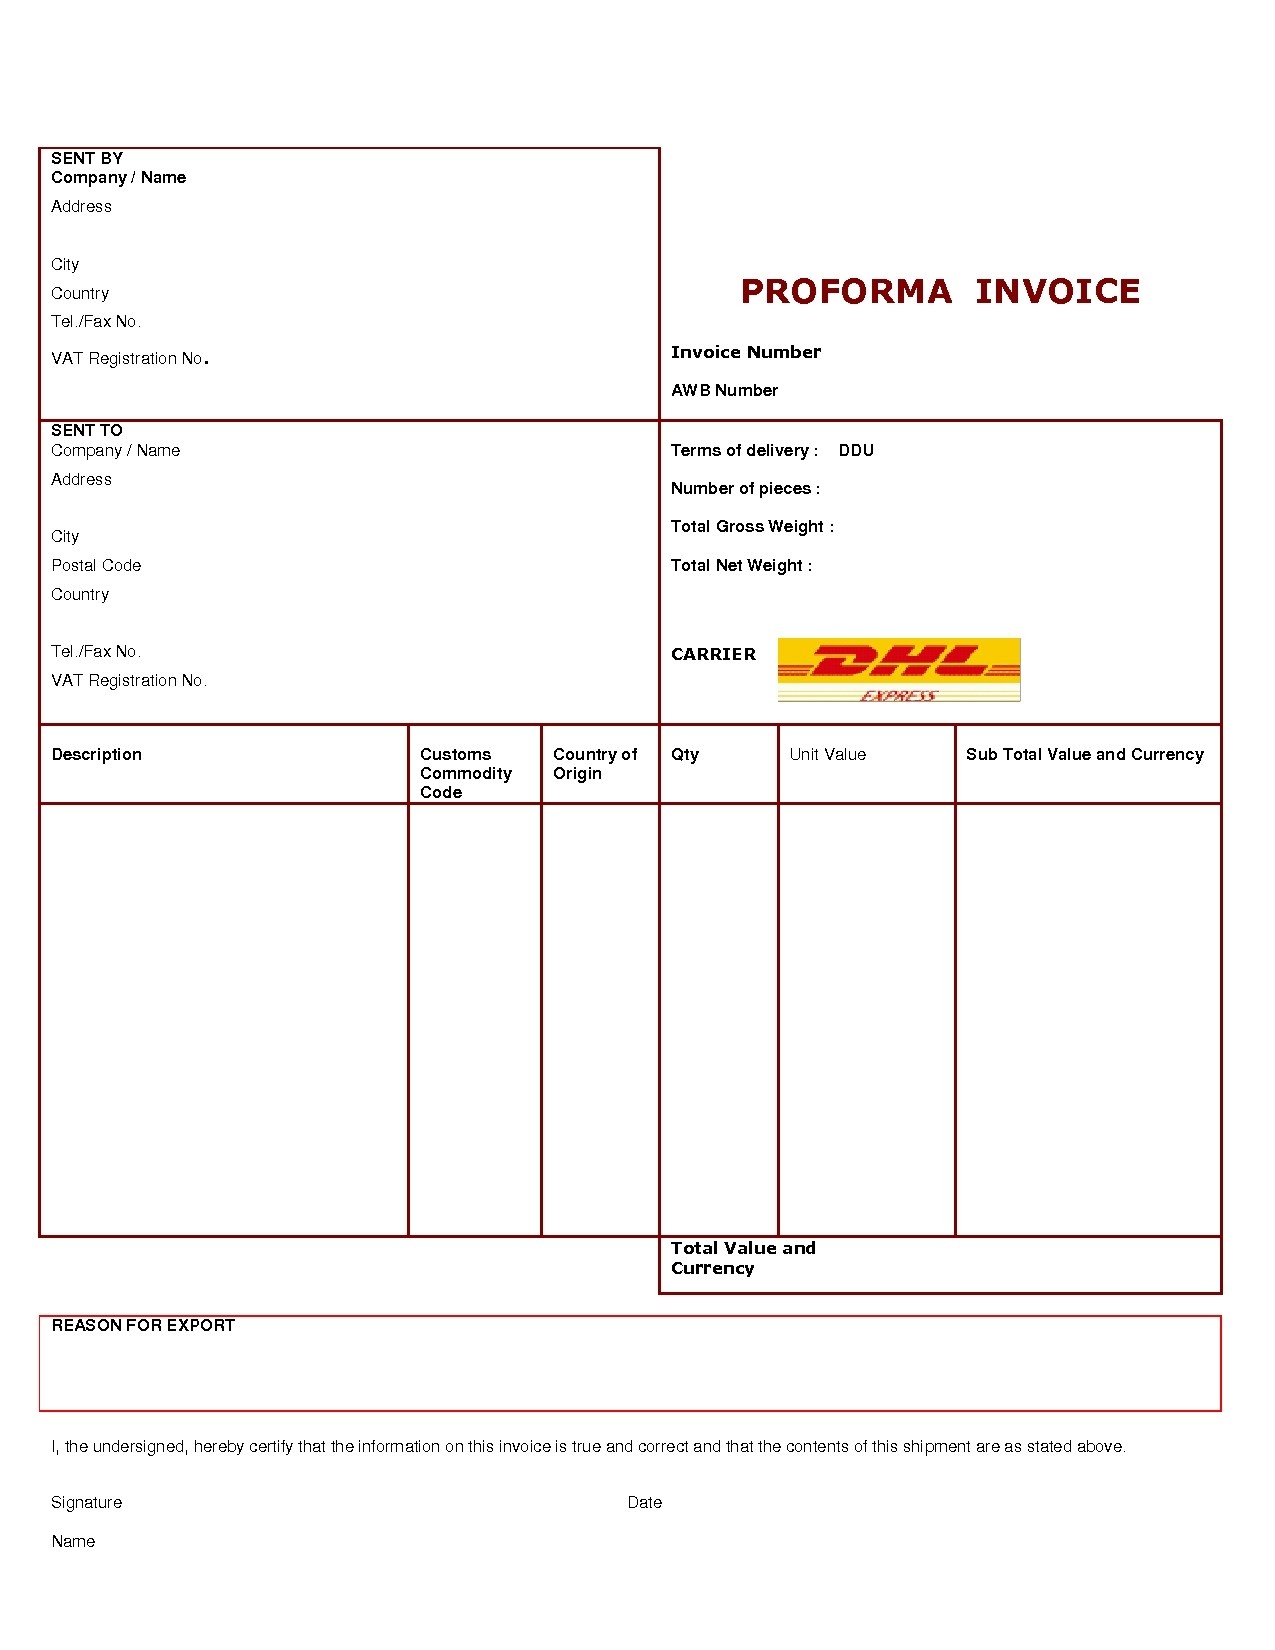 proforma invoice for advance payment sample resume example format of proforma invoice for advance payment